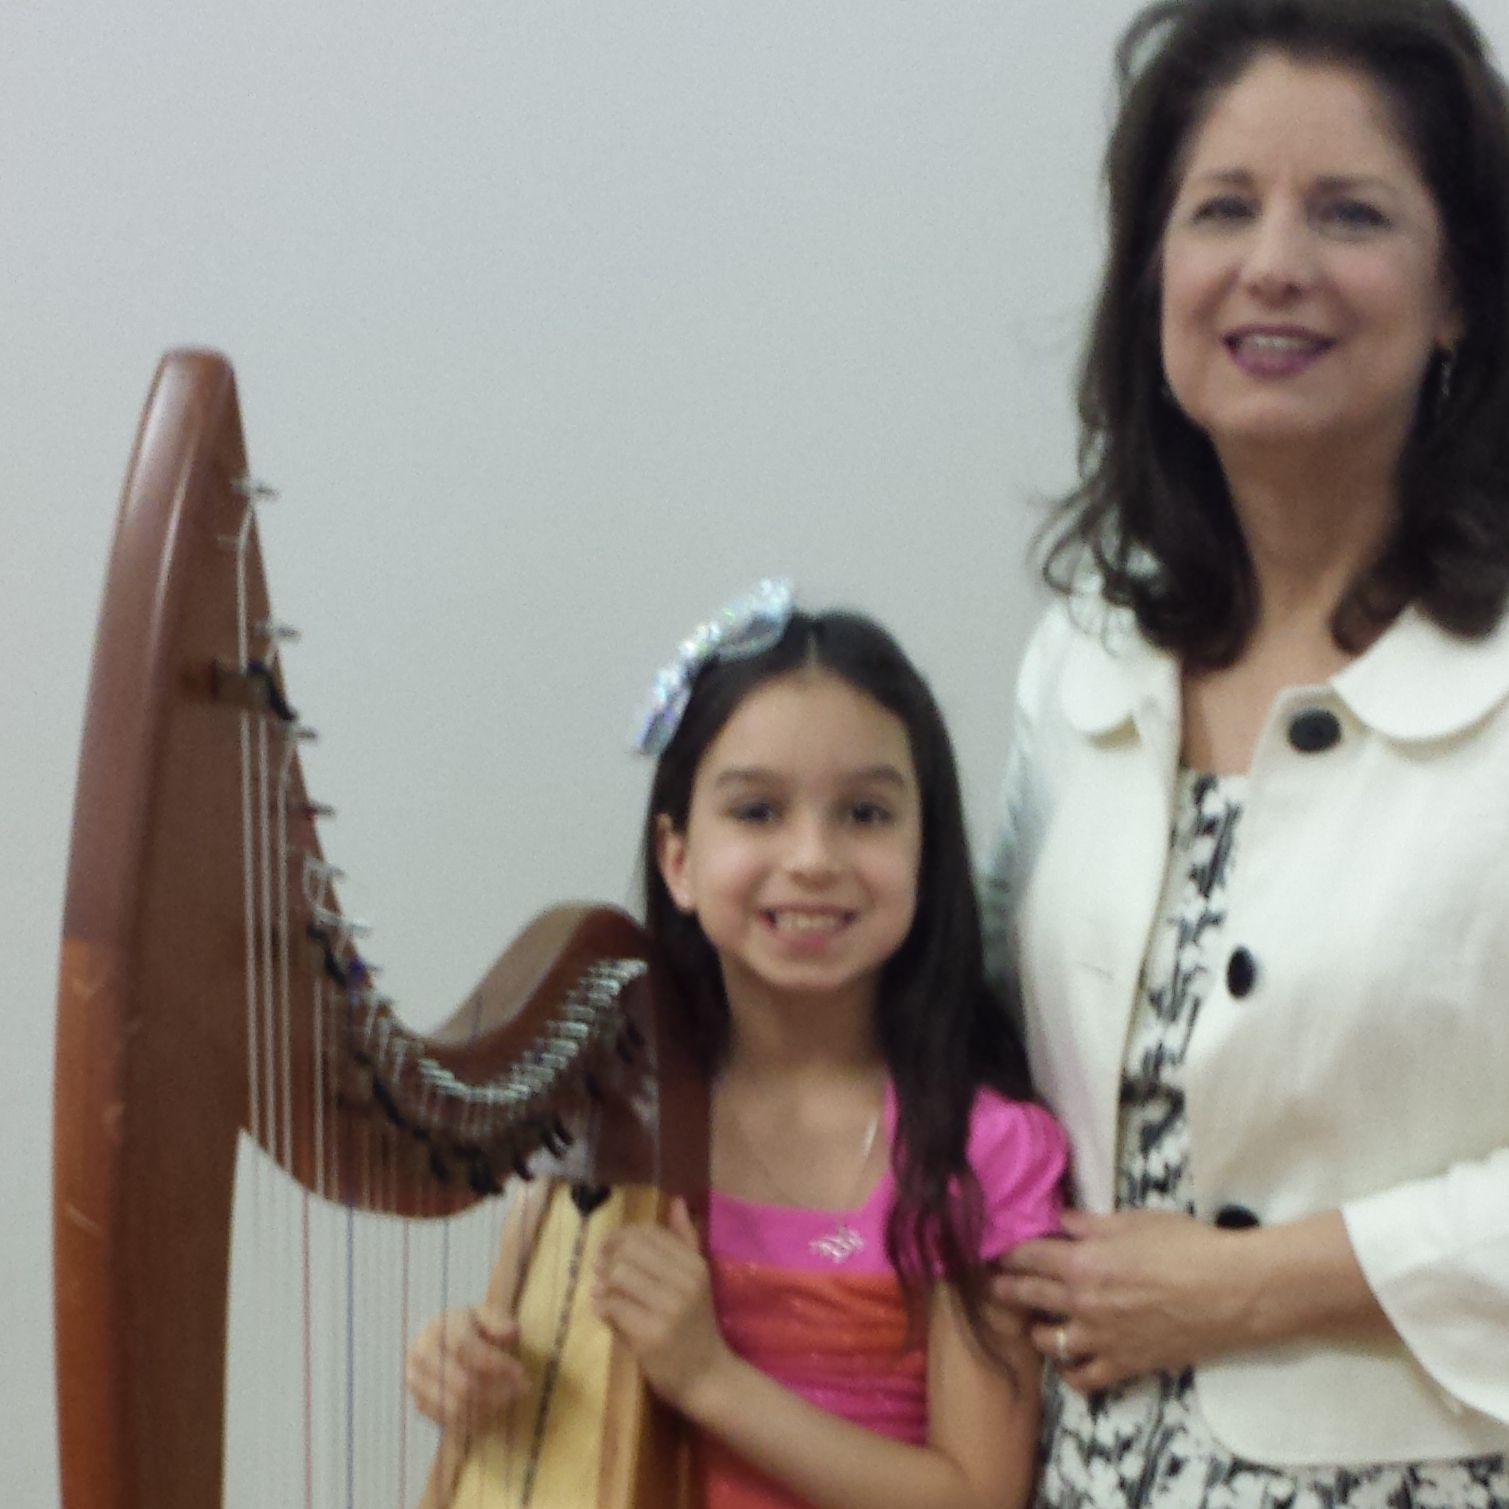 Harp Classes in Kingsport, Tennessee